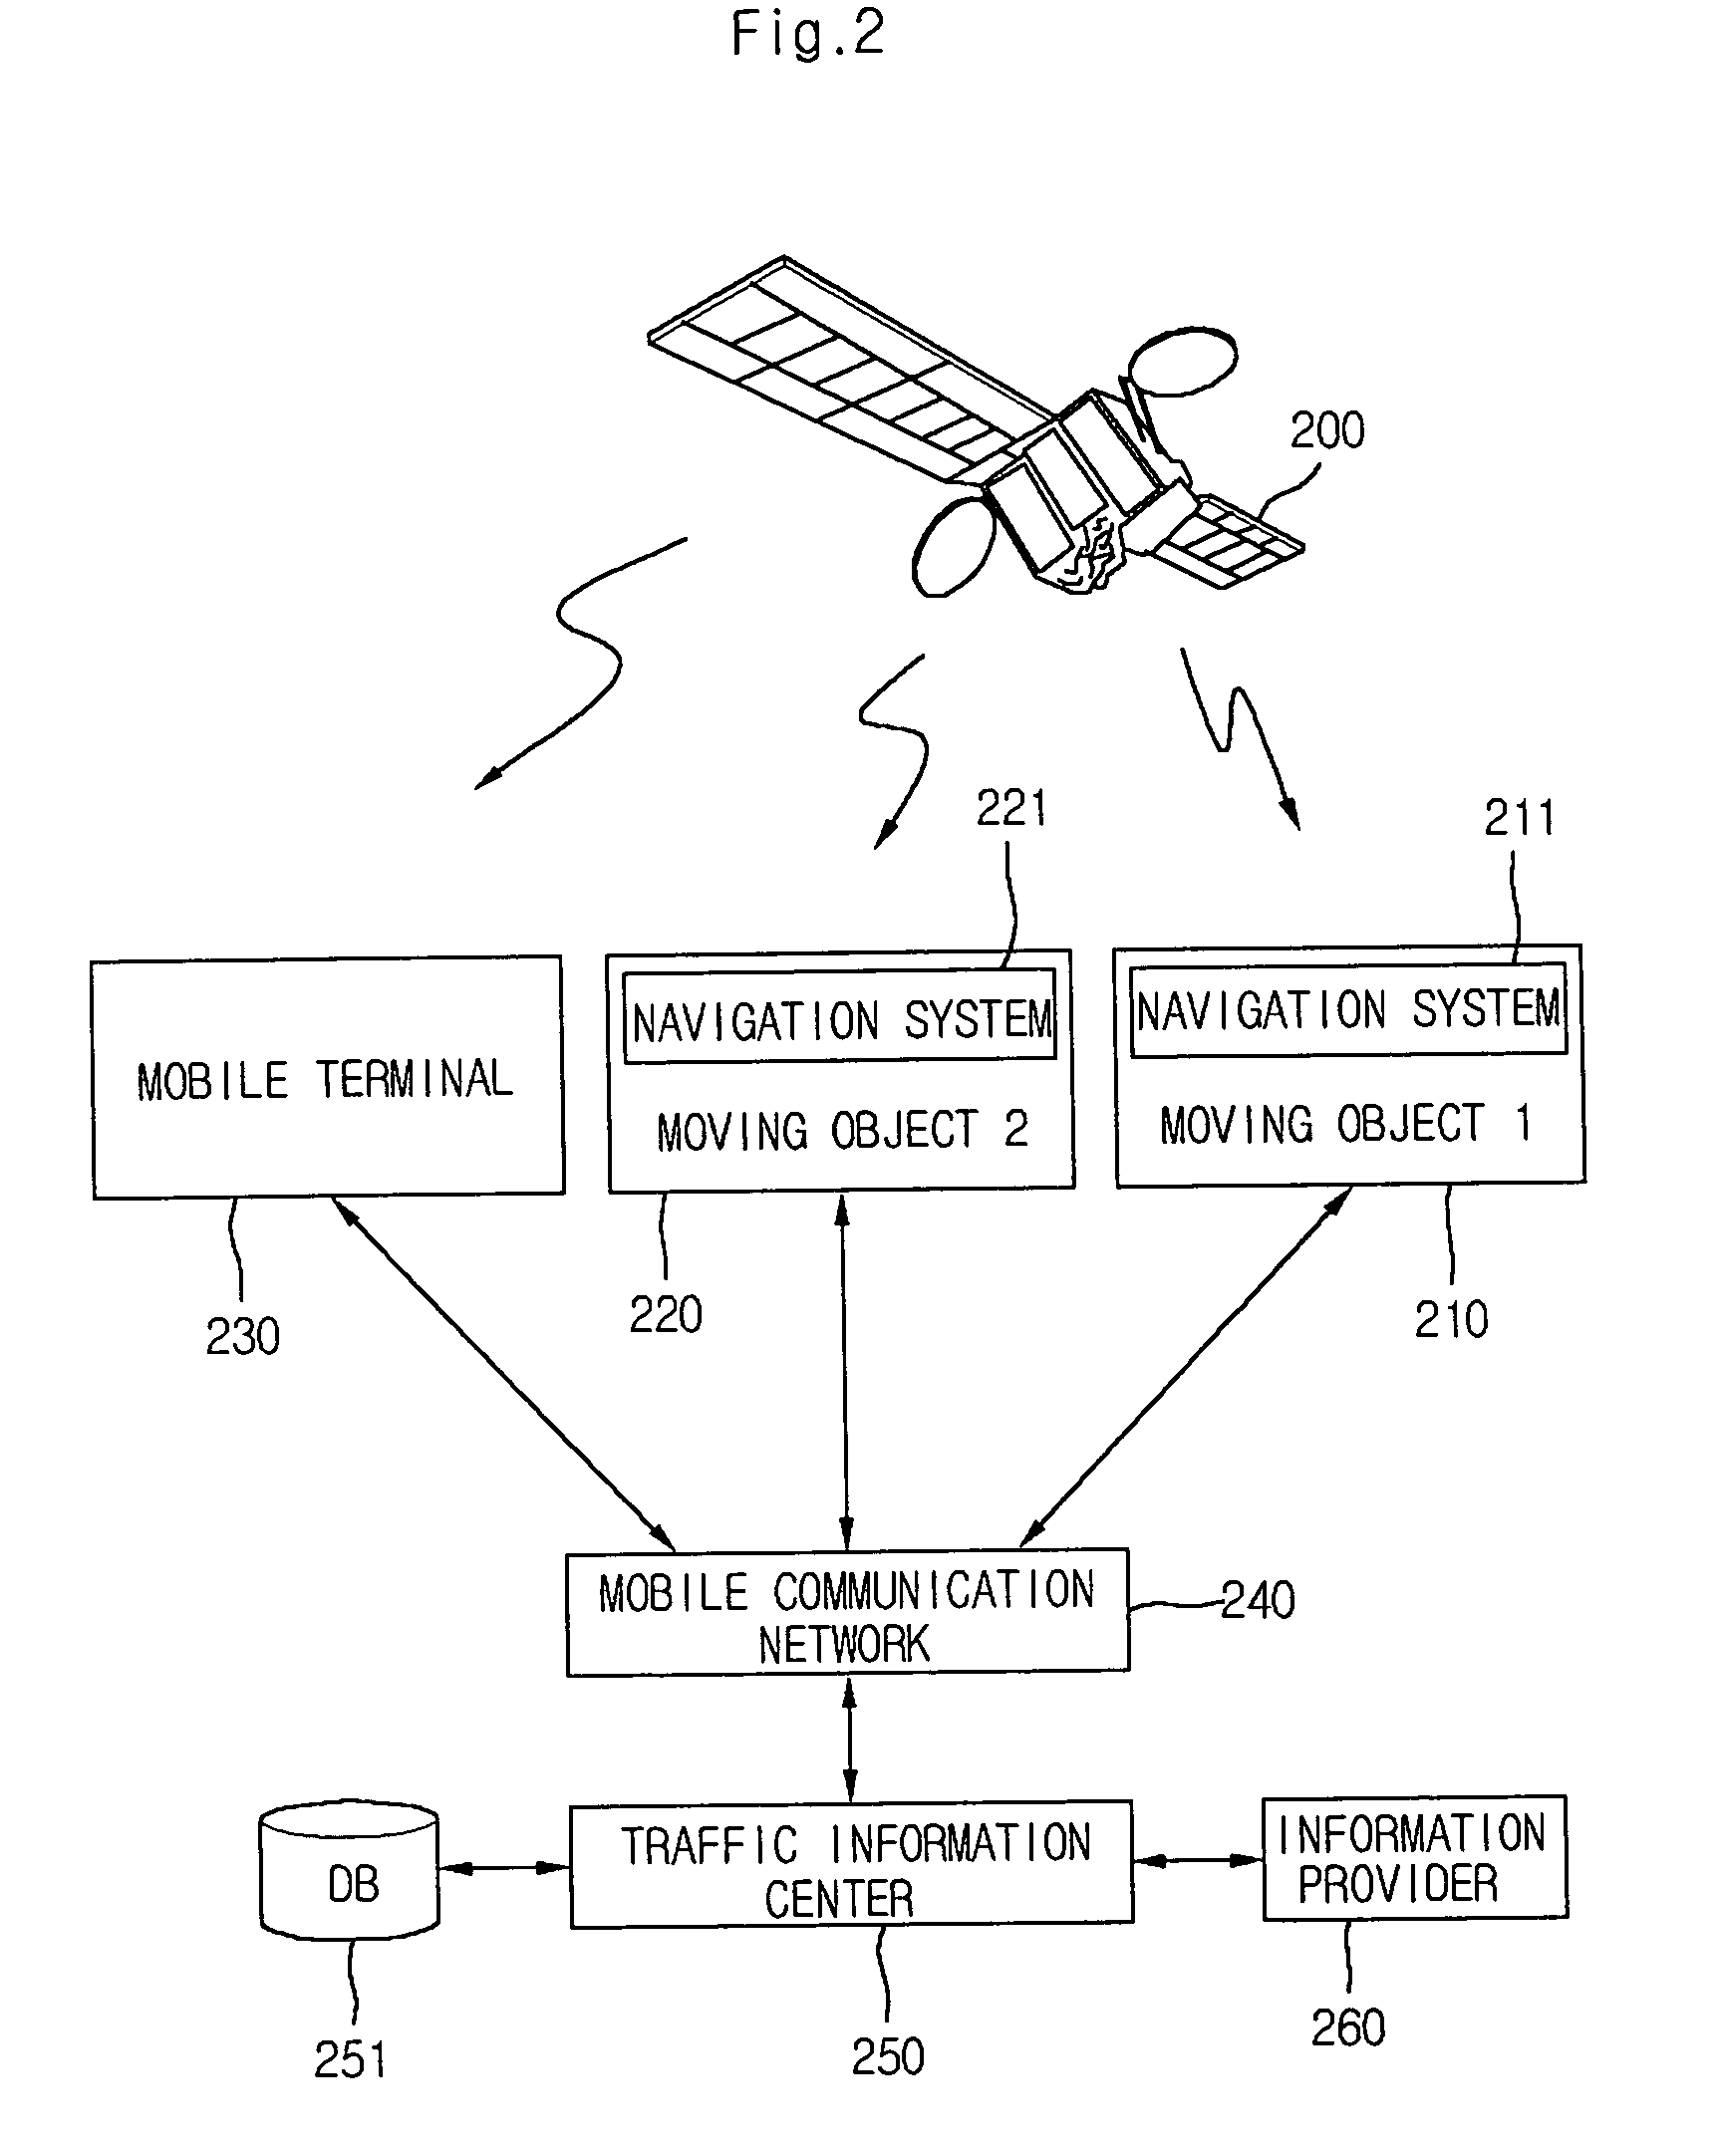 Apparatus and method for guiding location of the other party in navigation system